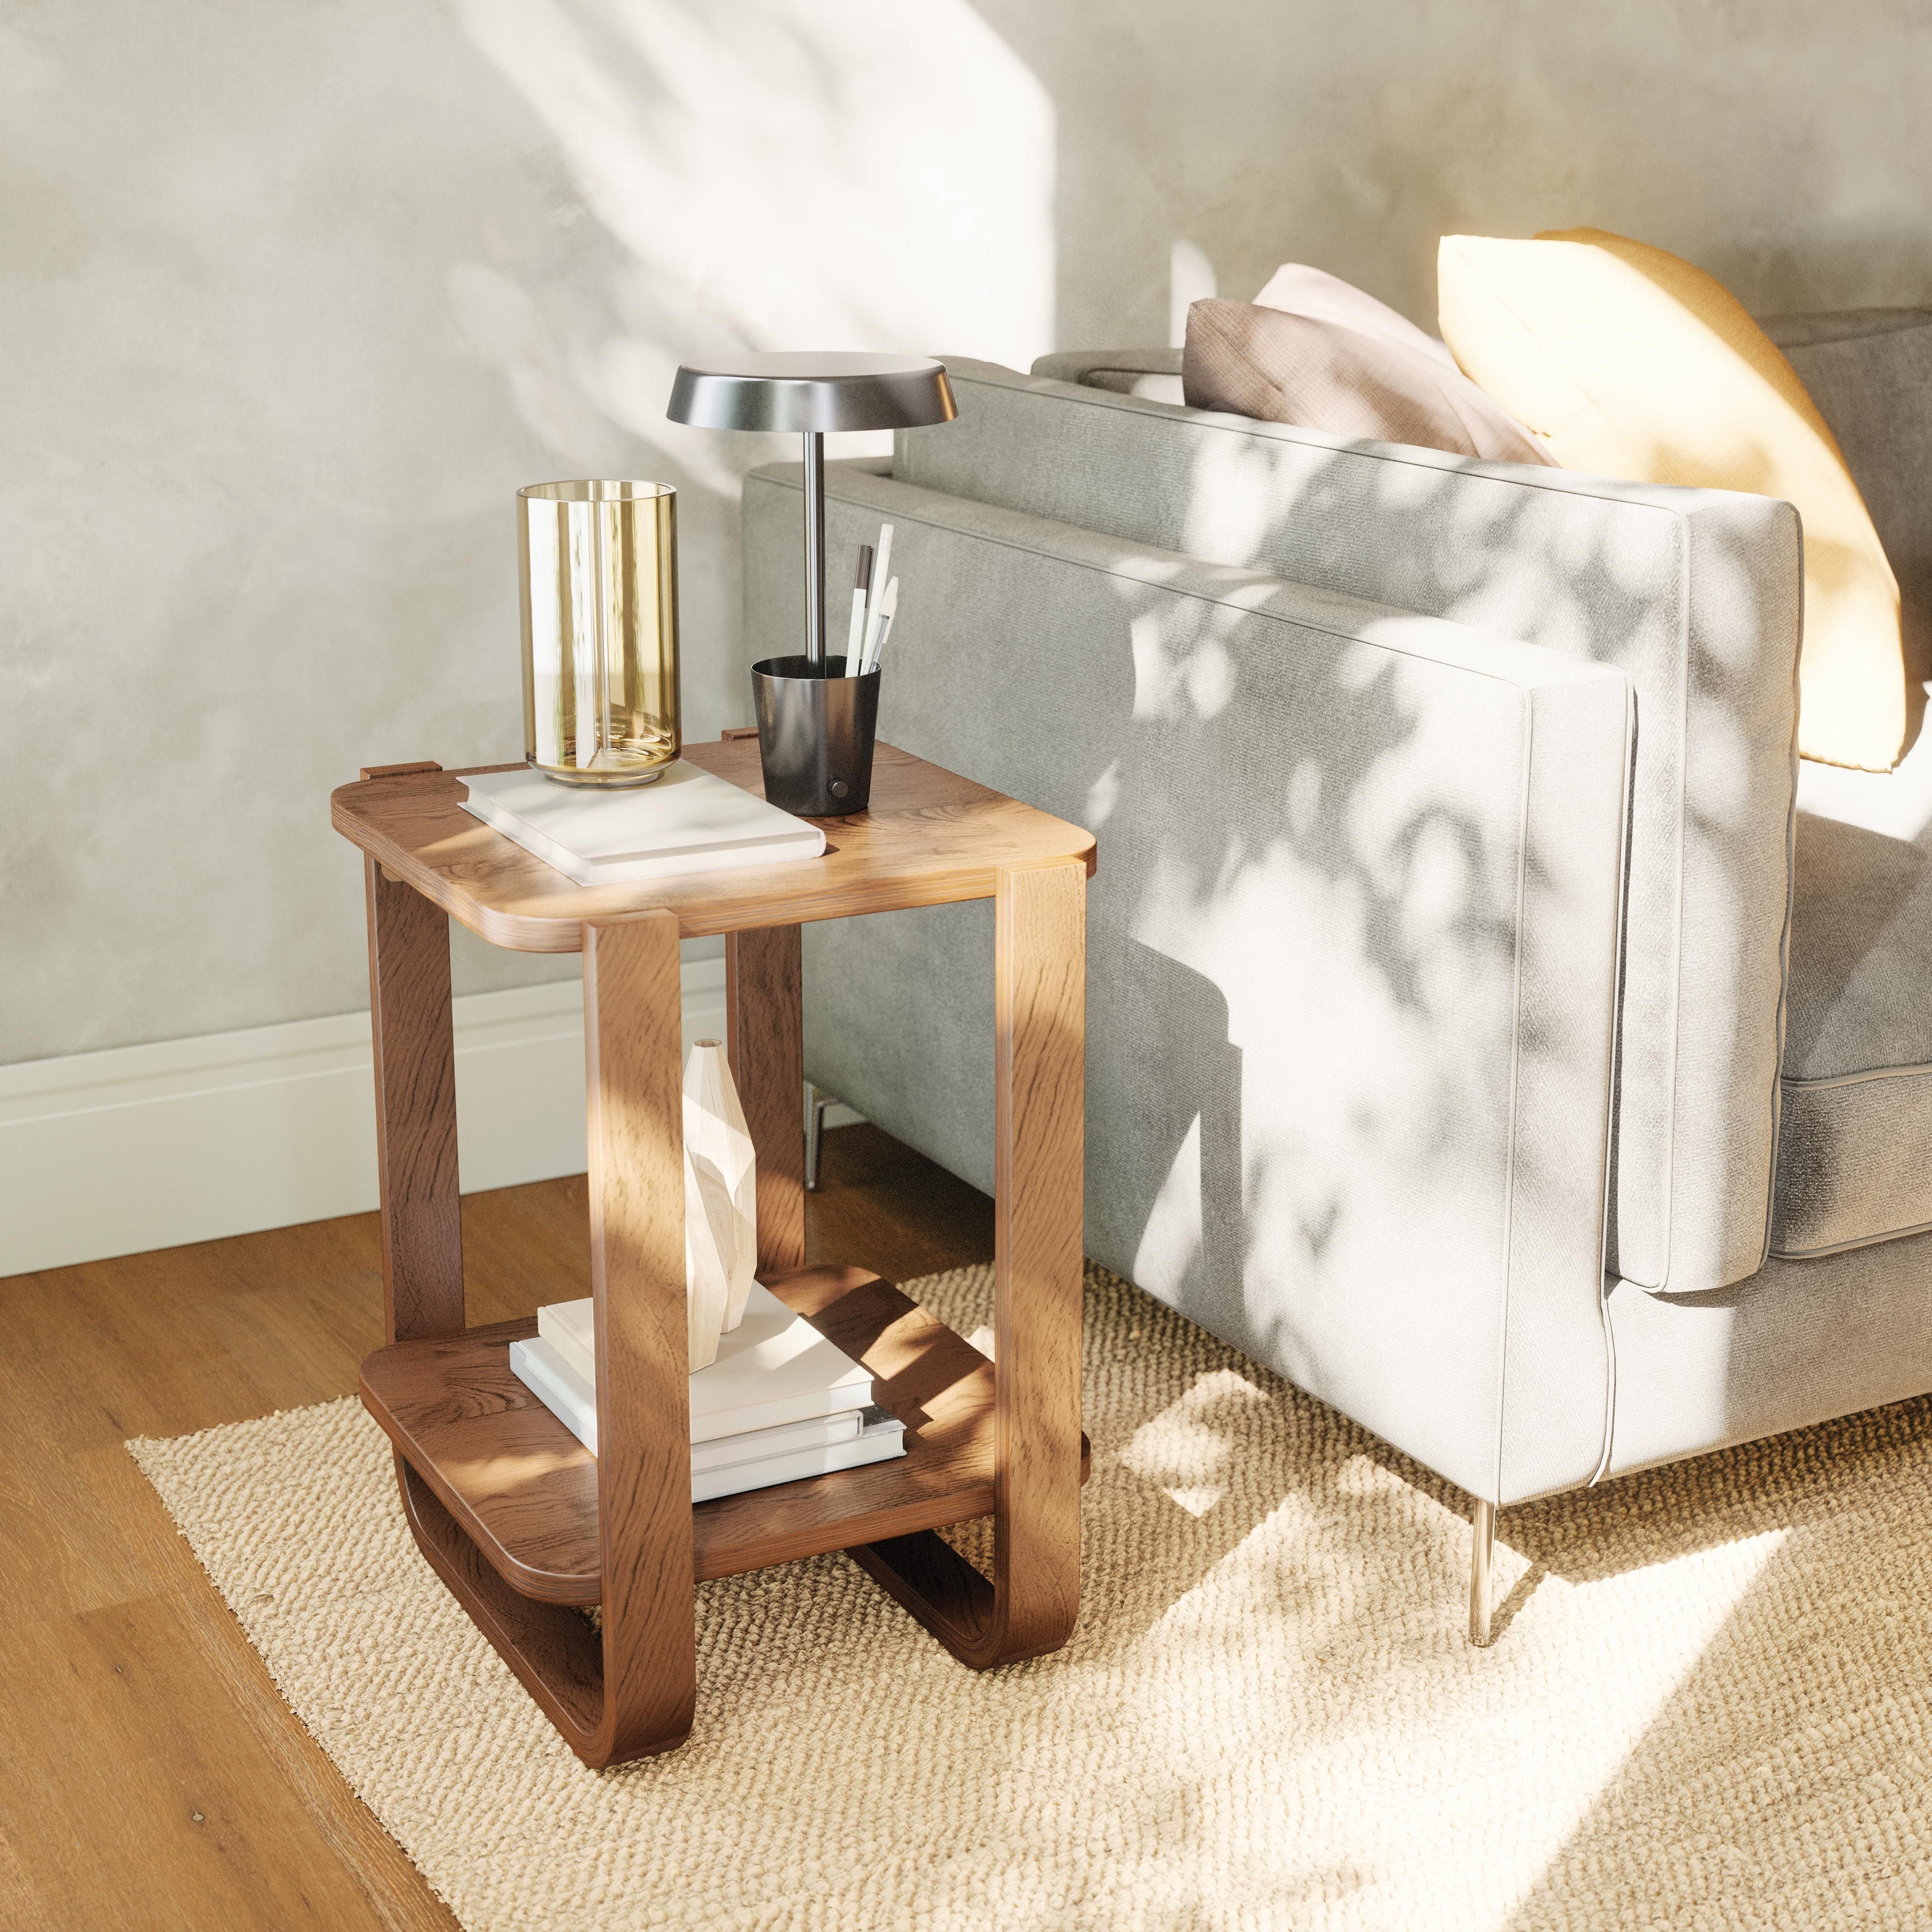 Aged Walnut Bellwood Side Table By Umbra Bellwood features soft bent-wood legs and two open tiers, bringing a warm, airy atmosphere to any living room, bedroom or entryway. This multi-purpose side table boasts ample storage capacity, supporting 90.7 kg an